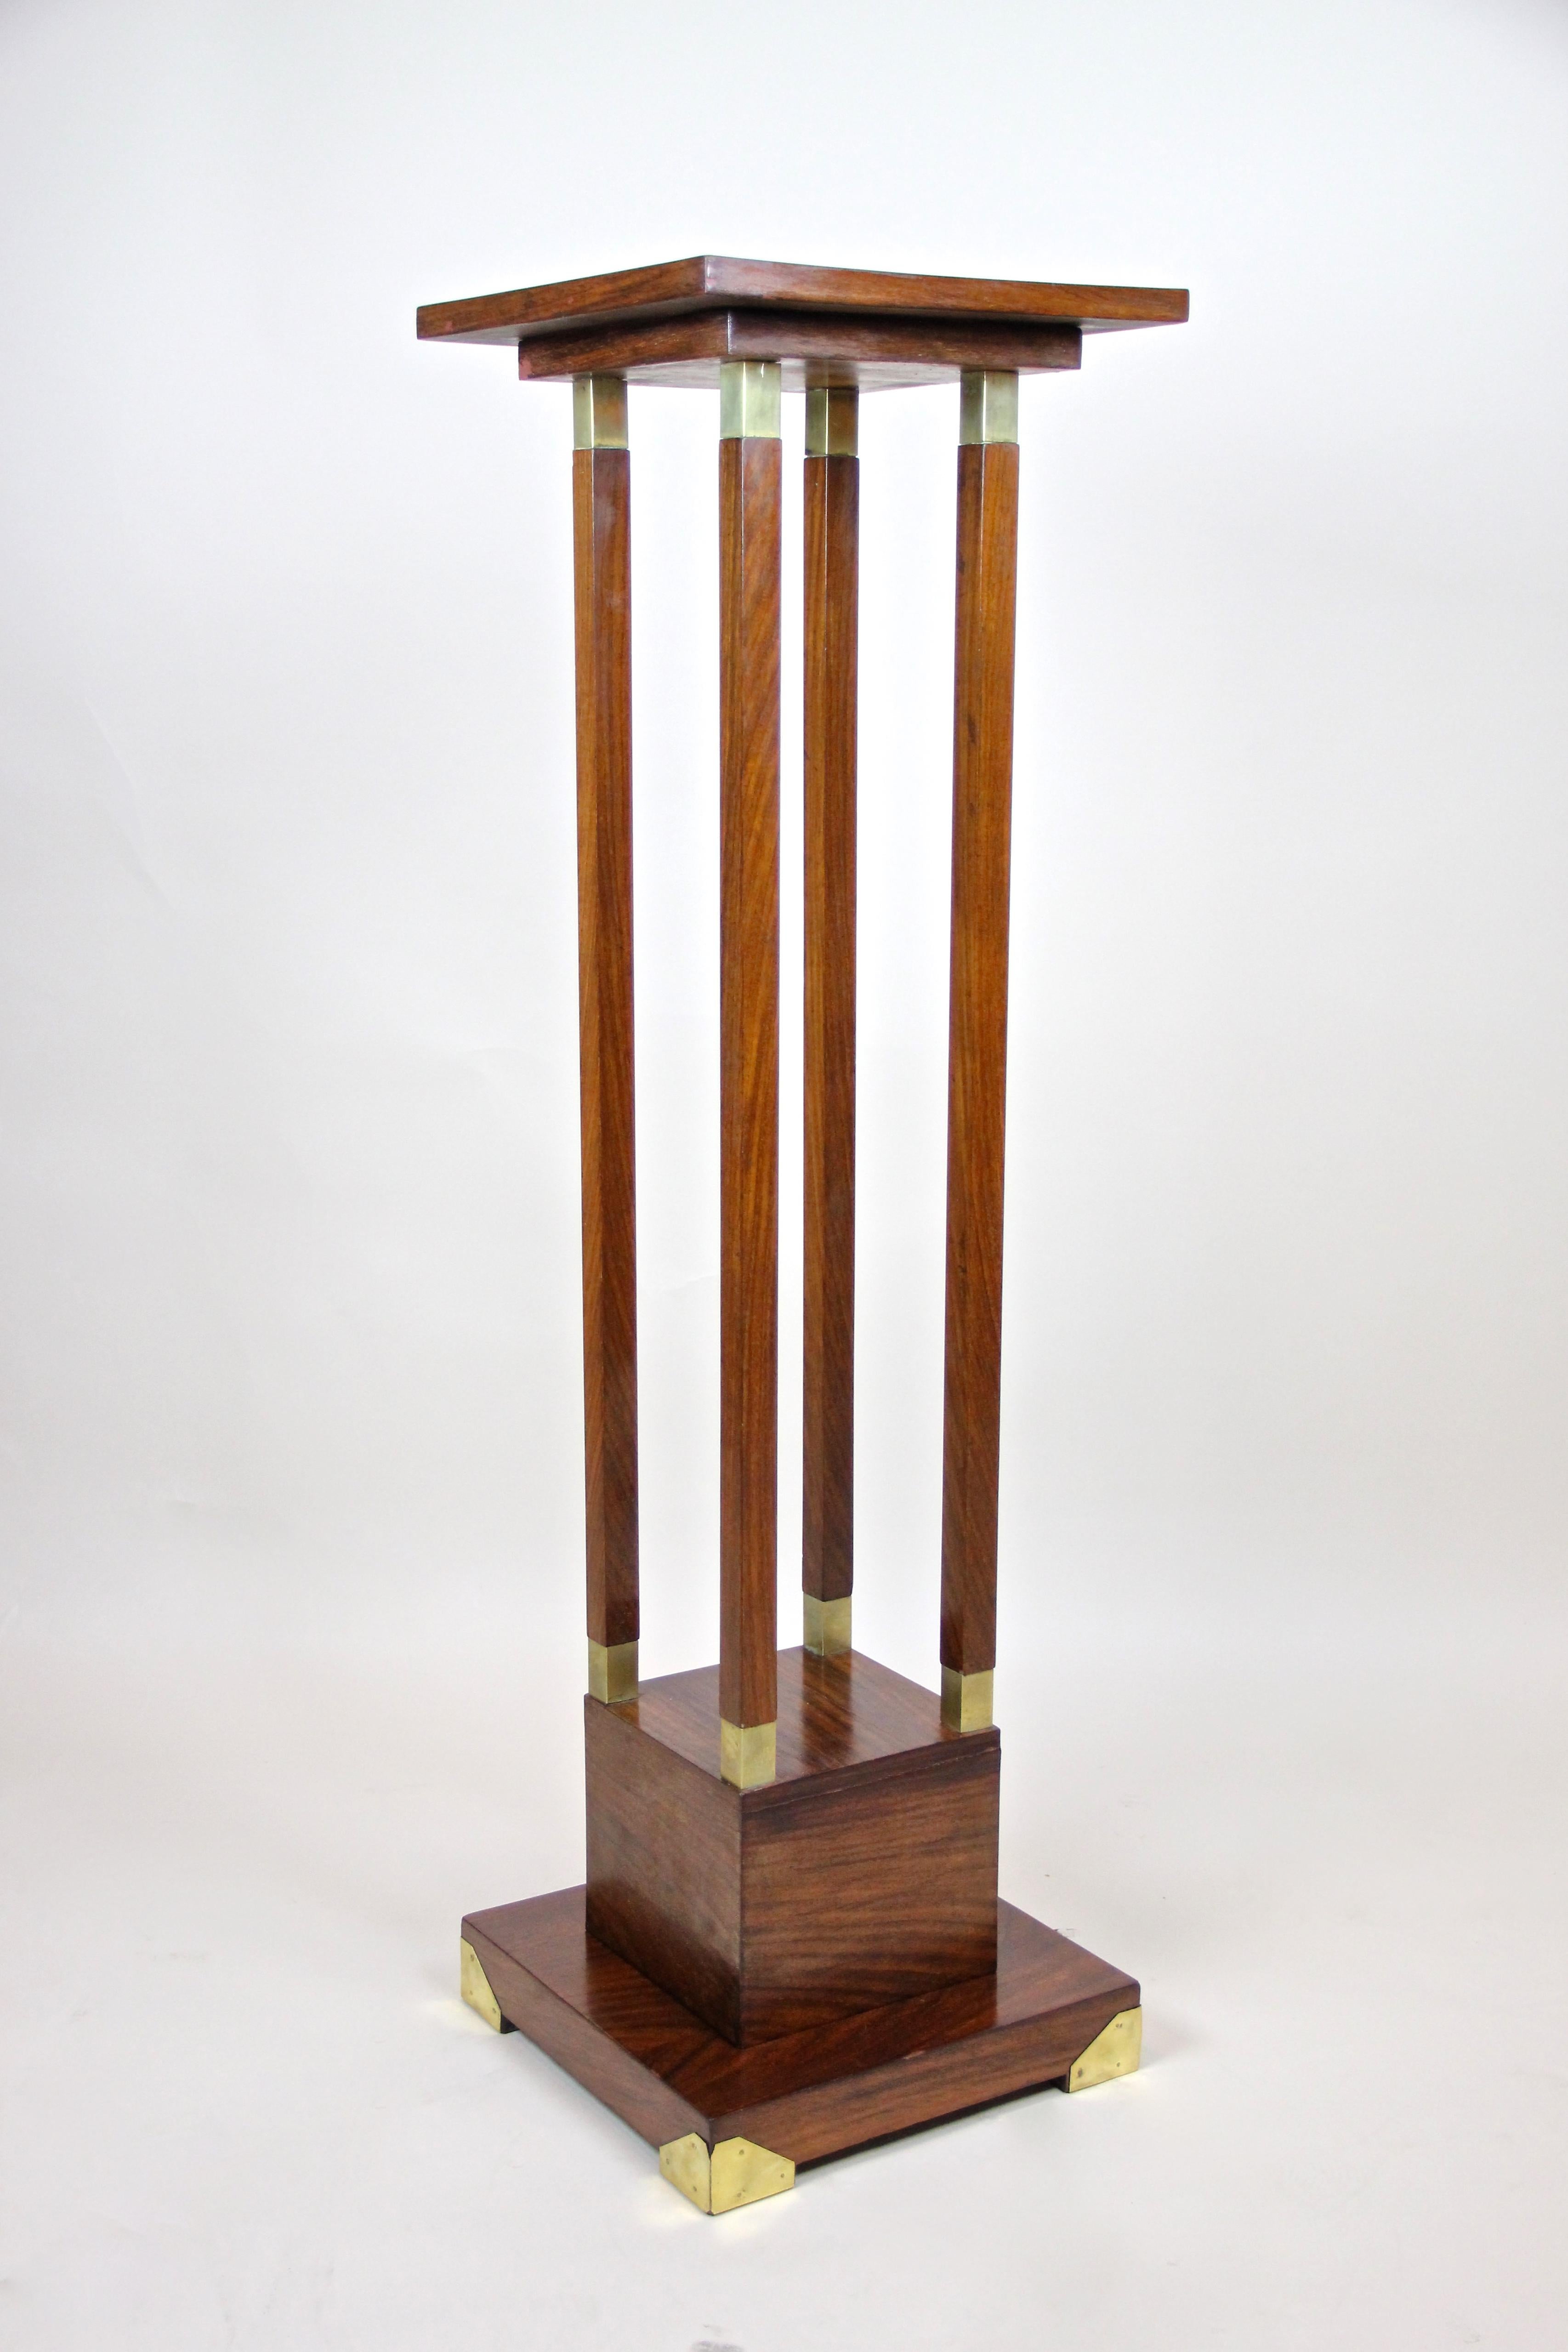 Great palisander pedestal from the early Art Nouveau period in Austria, circa 1900. Impressing with a timeless design, this beautiful pedestal convinces with its straight shaped form, veneered in fine palisander. The base shows lovely brass